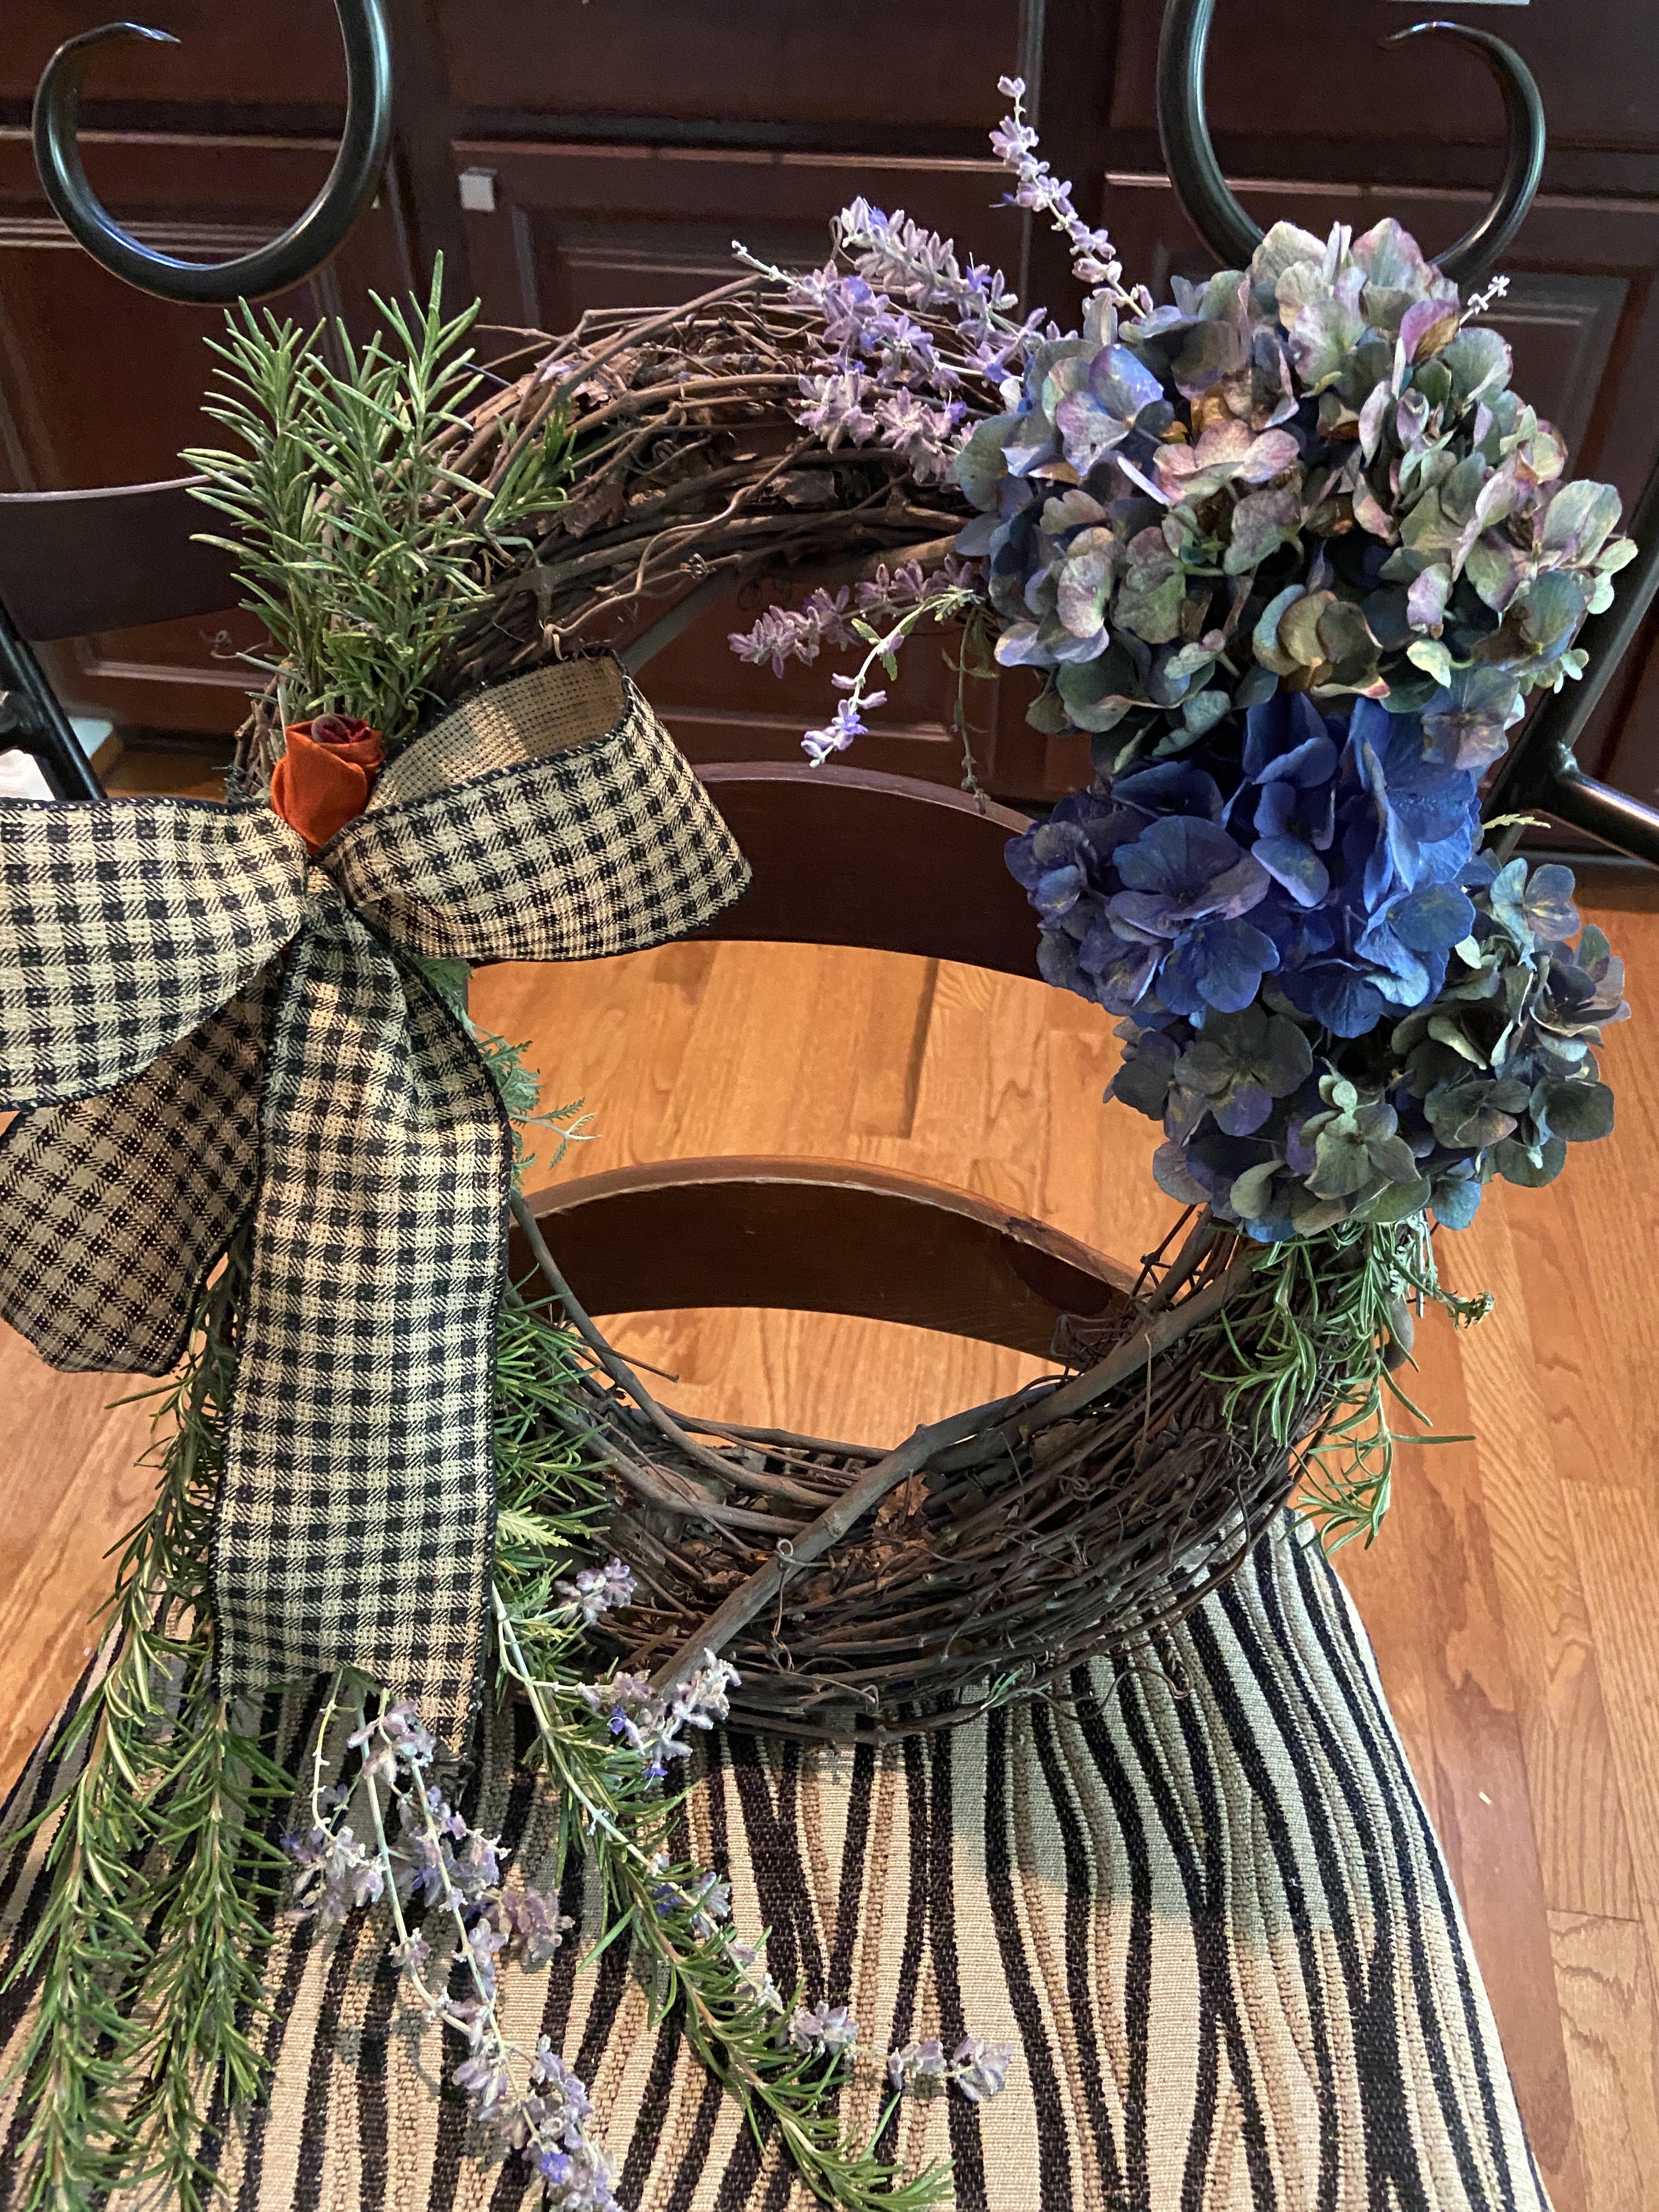 Sunday Flowers…Time for Wreaths